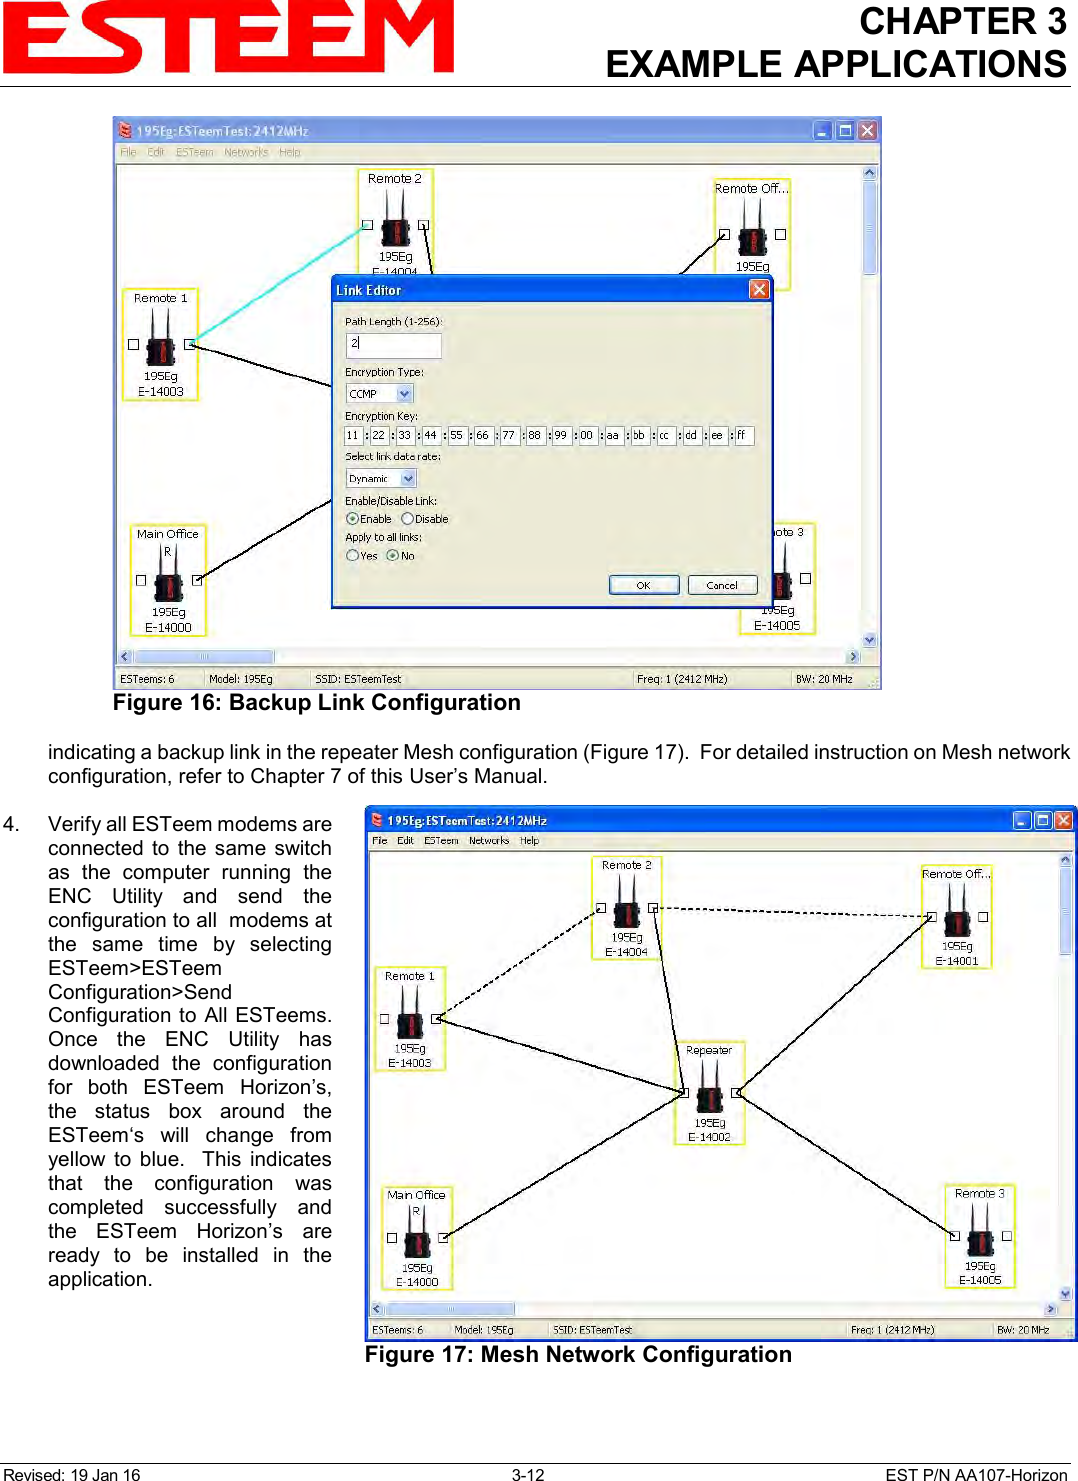 CHAPTER 3 EXAMPLE APPLICATIONS  Revised: 19 Jan 16  3-12  EST P/N AA107-Horizon indicating a backup link in the repeater Mesh configuration (Figure 17).  For detailed instruction on Mesh network configuration, refer to Chapter 7 of this User’s Manual.  4.    Verify all ESTeem modems are connected  to  the  same  switch as  the  computer  running  the ENC  Utility  and  send  the configuration to all  modems at the  same  time  by  selecting ESTeem&gt;ESTeem Configuration&gt;Send Configuration to All ESTeems. Once  the  ENC  Utility  has downloaded  the  configuration for  both  ESTeem  Horizon’s, the  status  box  around  the ESTeem‘s  will  change  from yellow  to  blue.    This  indicates that  the  configuration  was completed  successfully  and the  ESTeem  Horizon’s  are ready  to  be  installed  in  the application.  Figure 17: Mesh Network Configuration   Figure 16: Backup Link Configuration  